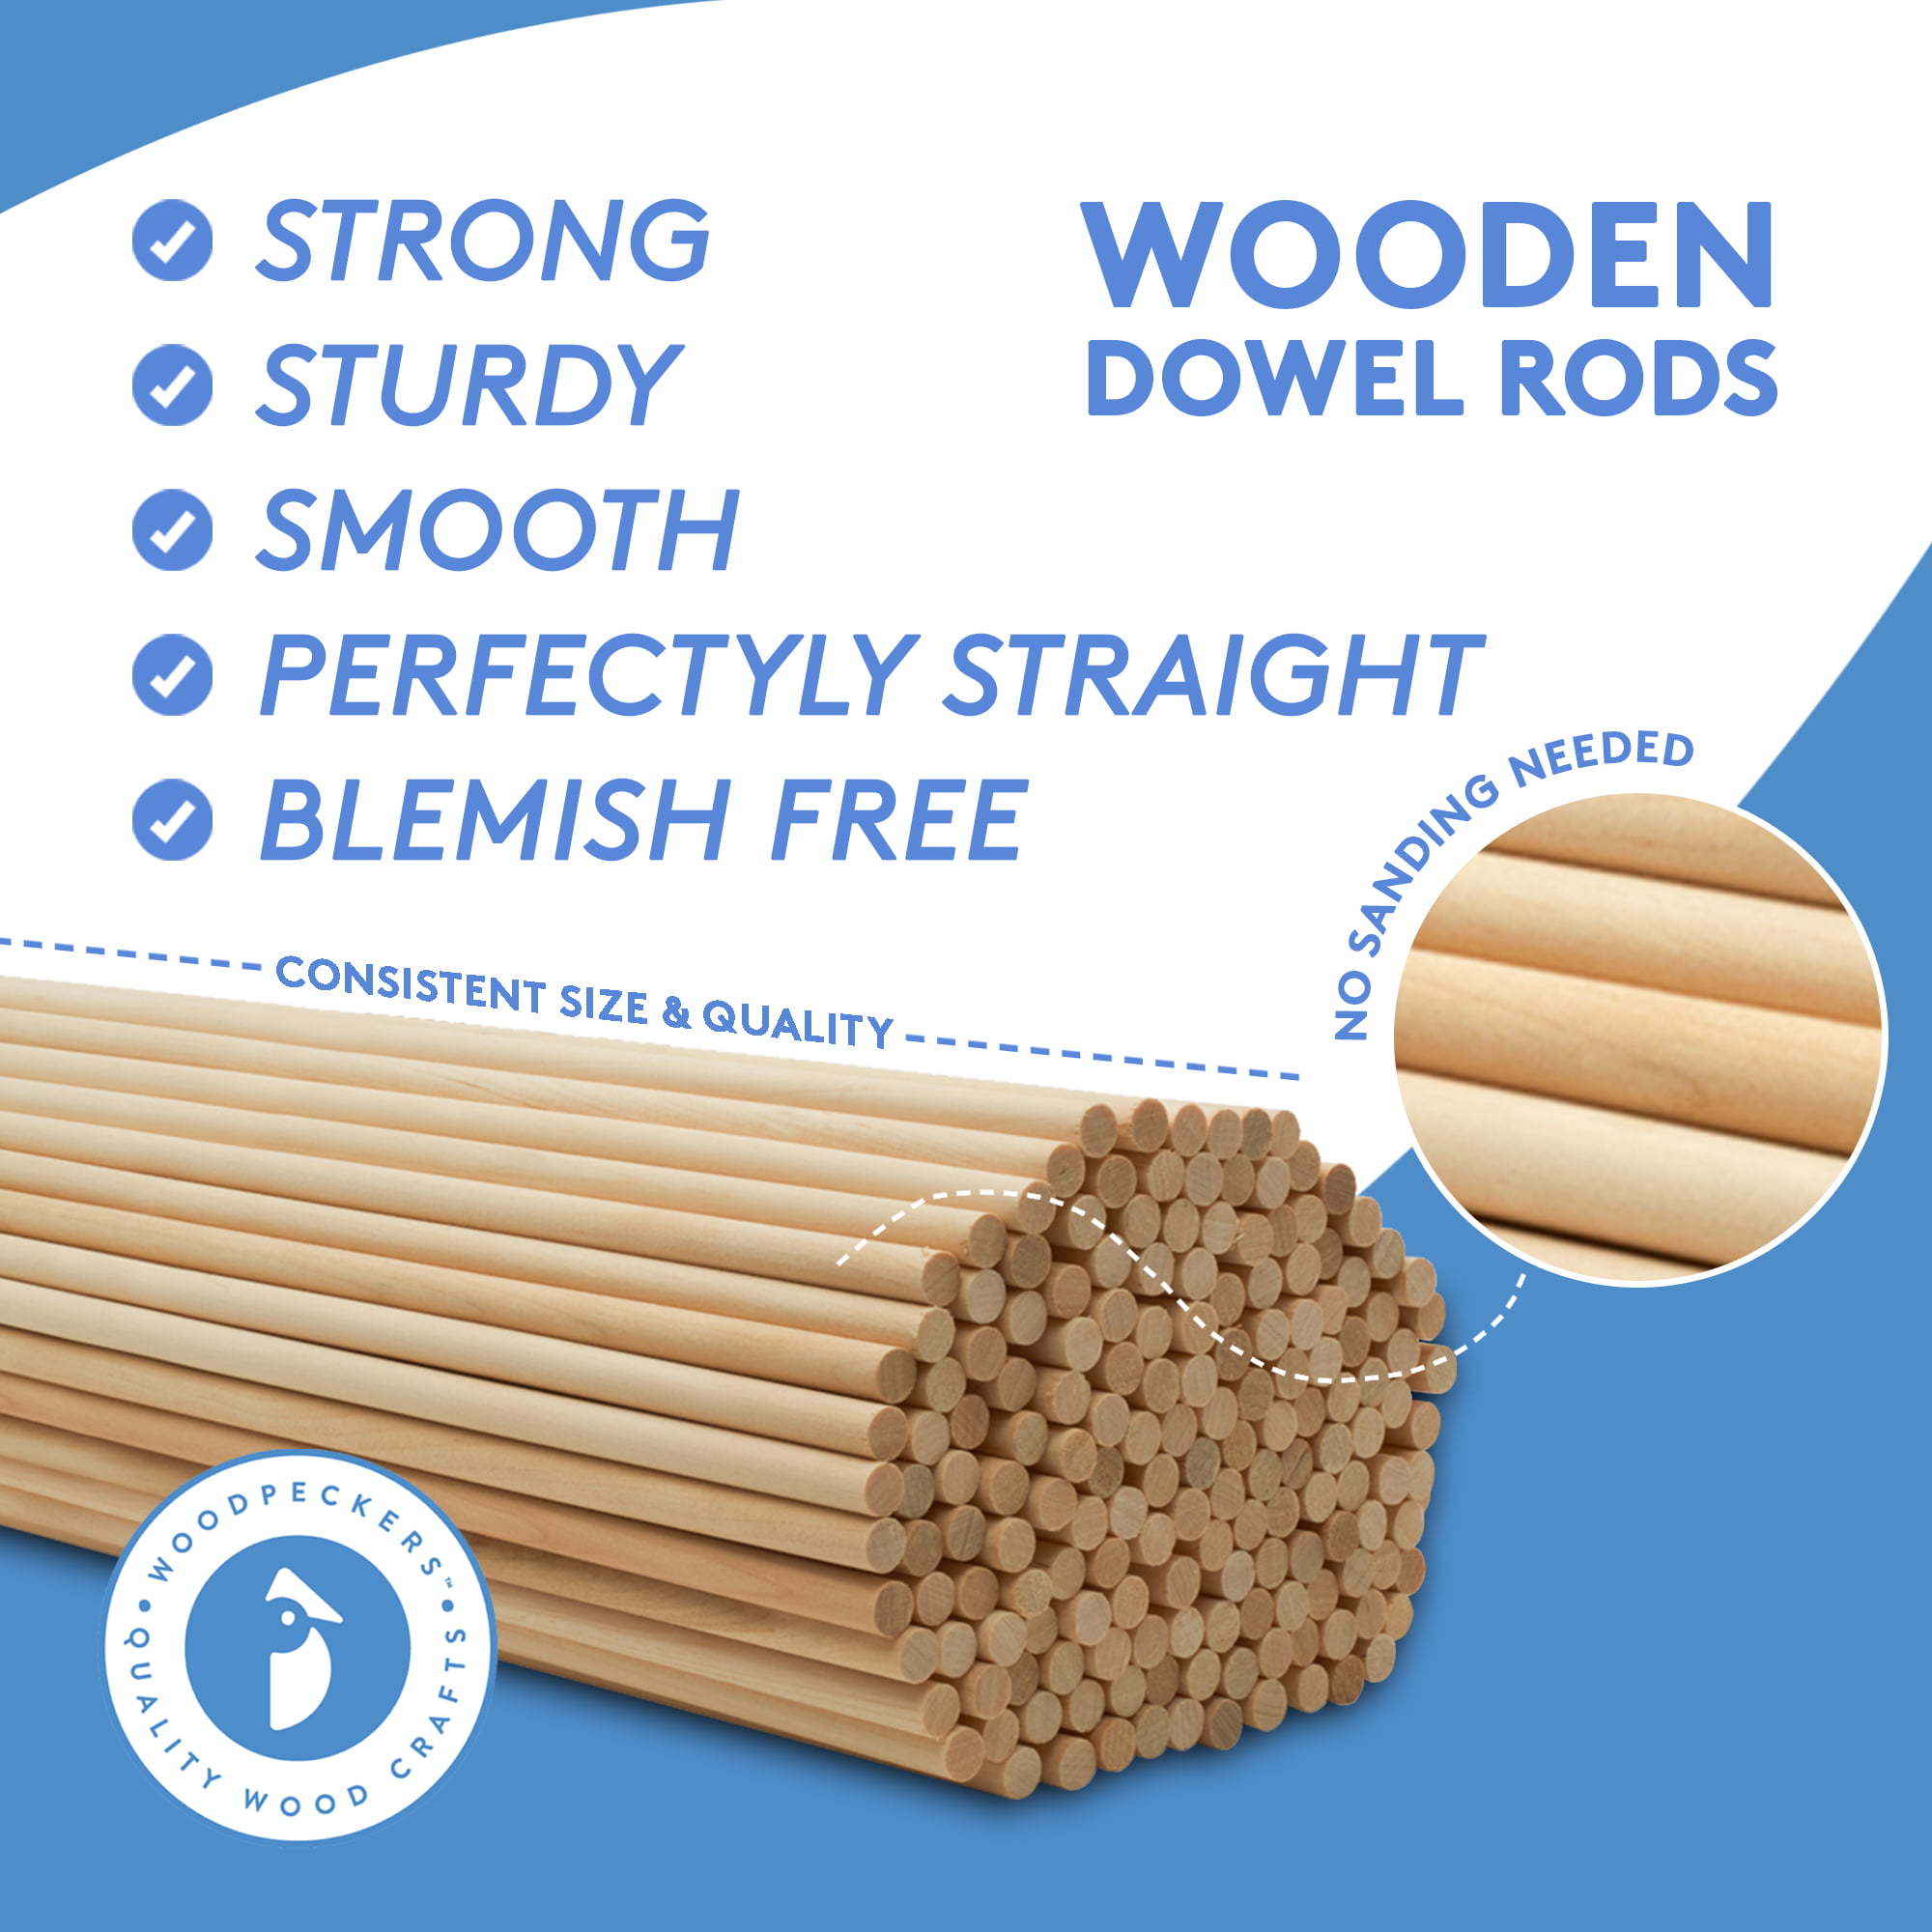 Dowel Rods Wood Sticks Wooden Dowel Rods - 1/4 x 36 Inch Unfinished Hardwood  Sticks - for Crafts and DIYers - 25 Pieces by Woodpeckers 